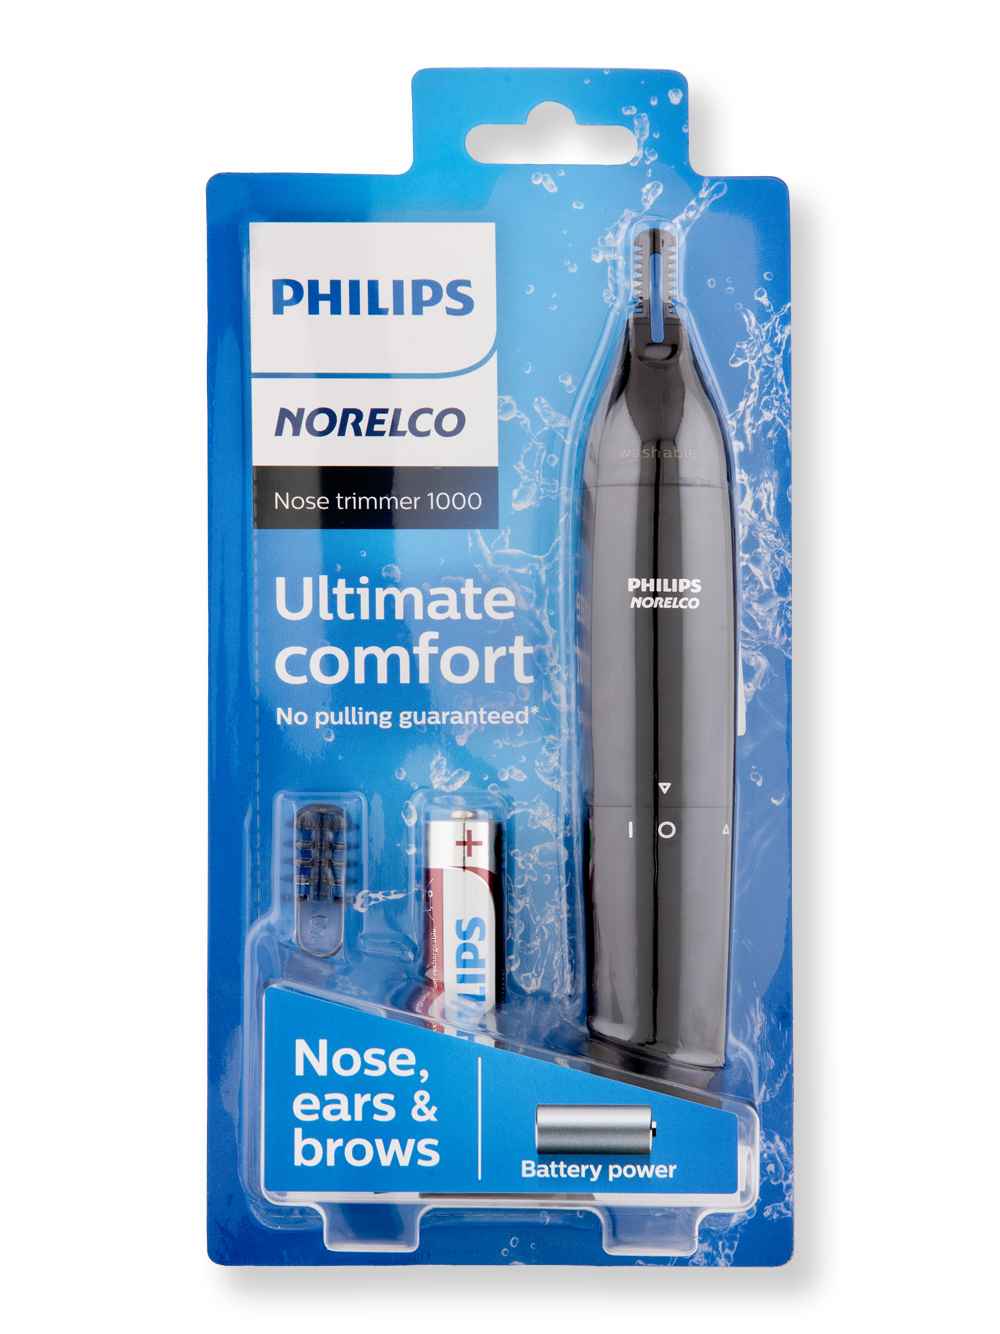 Philips Norelco Philips Norelco Nosetrimmer 1000 Razors, Blades, & Trimmers 